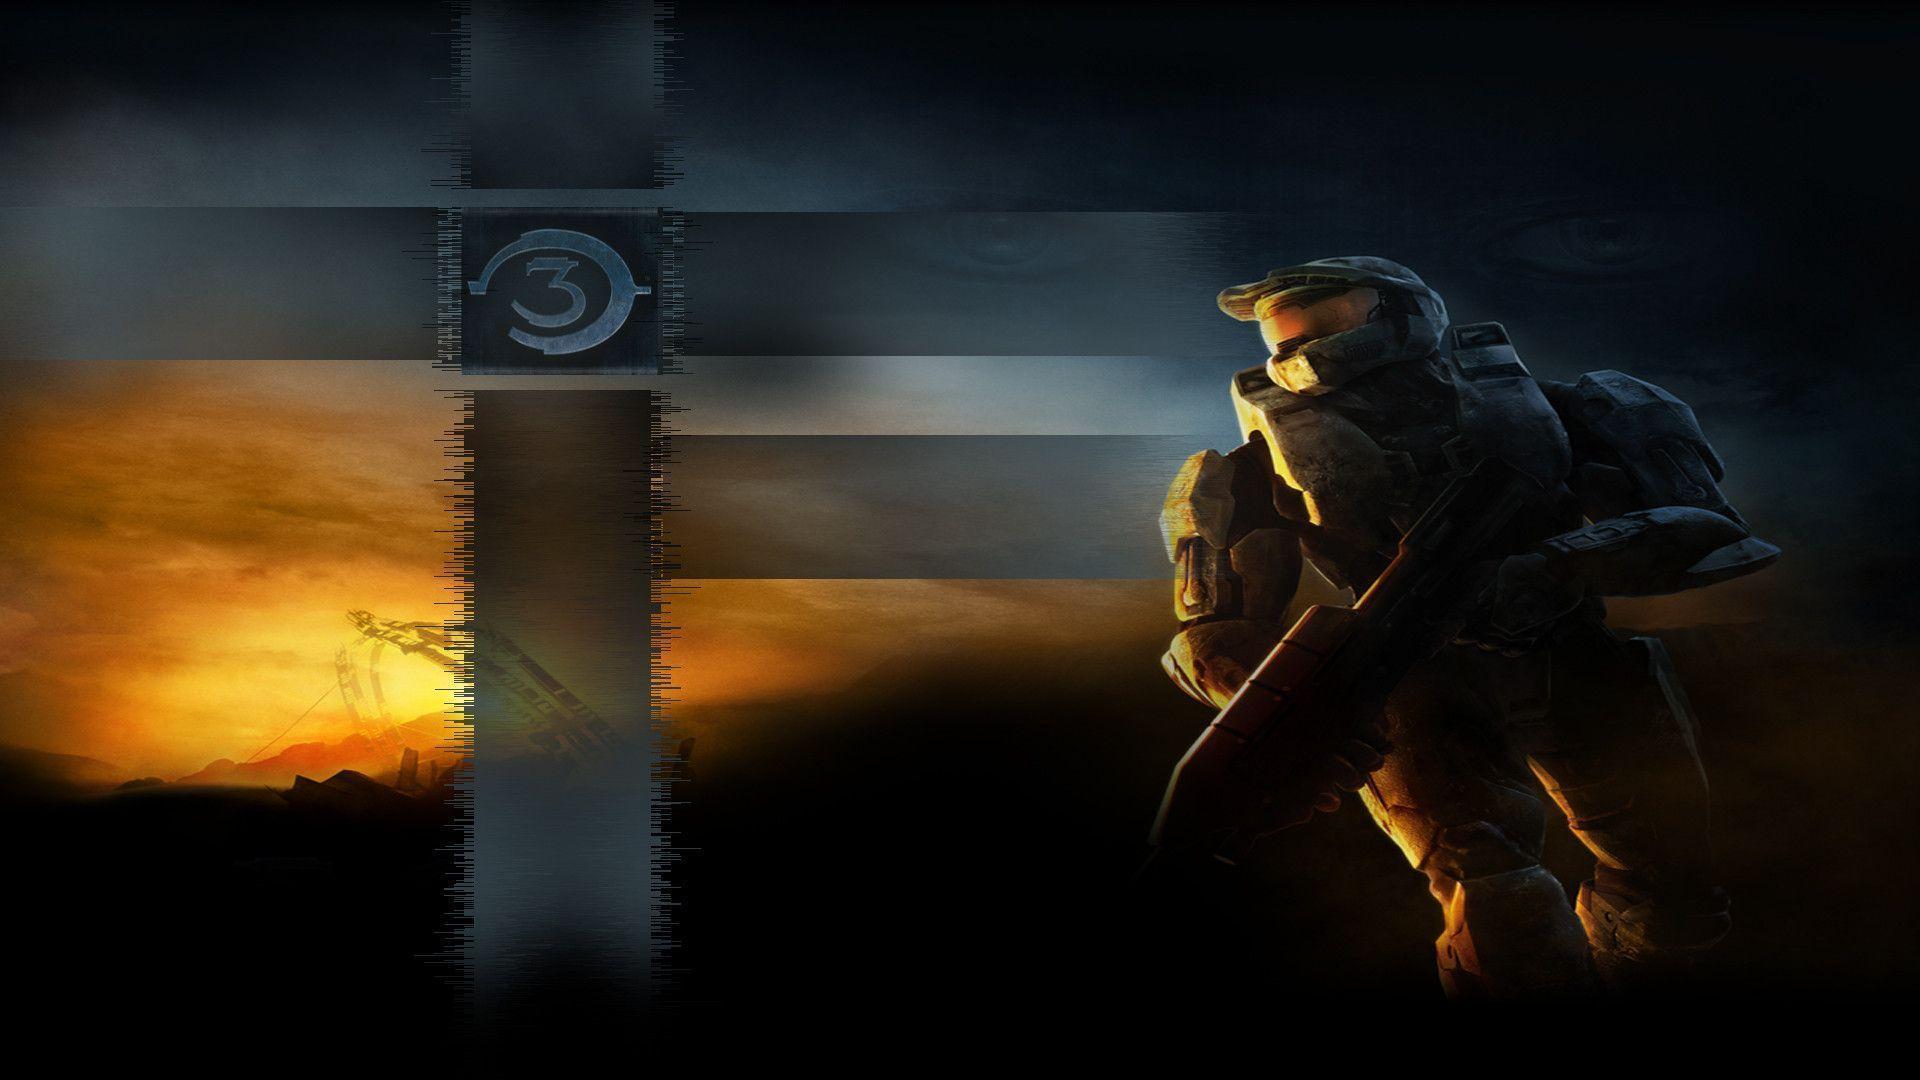 Ps3 Halo 3 Wallpapers